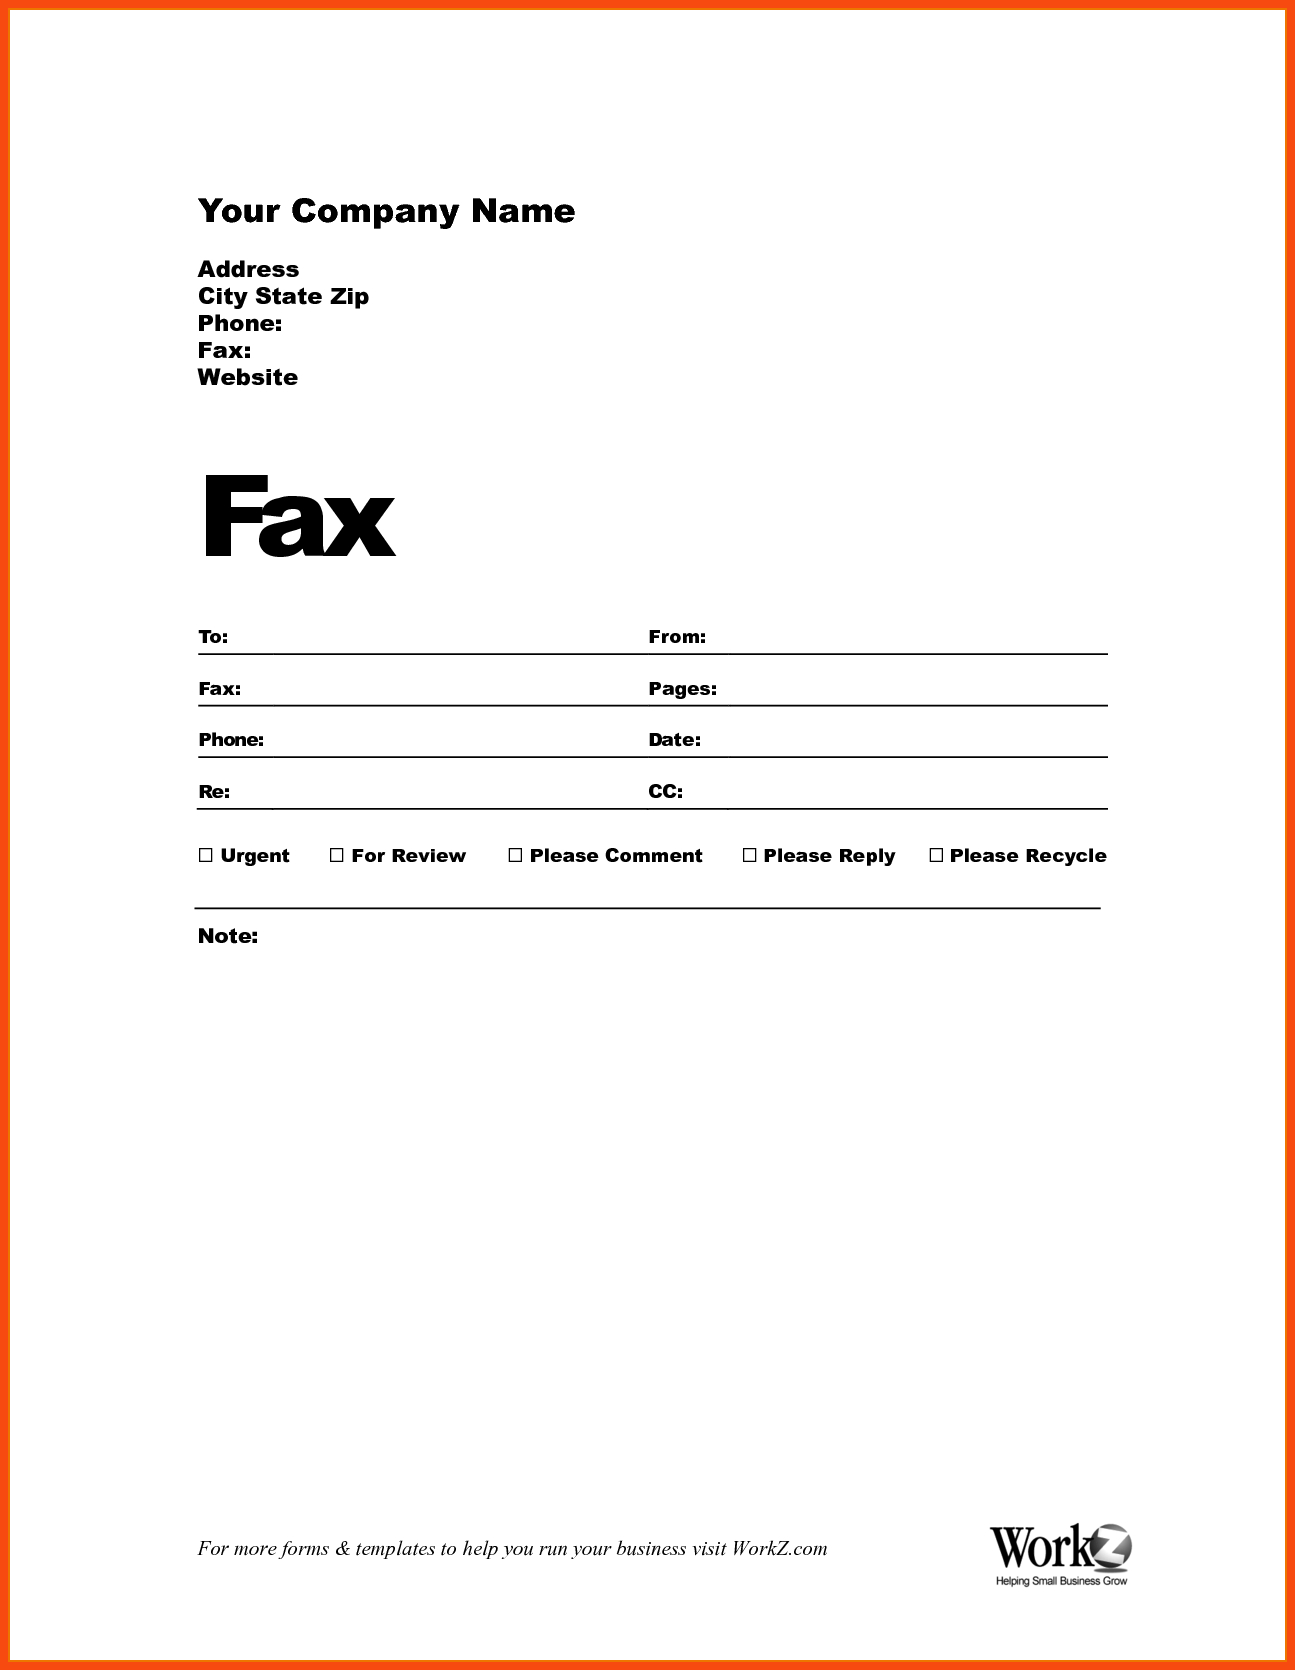 Fax Template In Word 2010 – Mahre.horizonconsulting.co Intended For Fax Template Word 2010